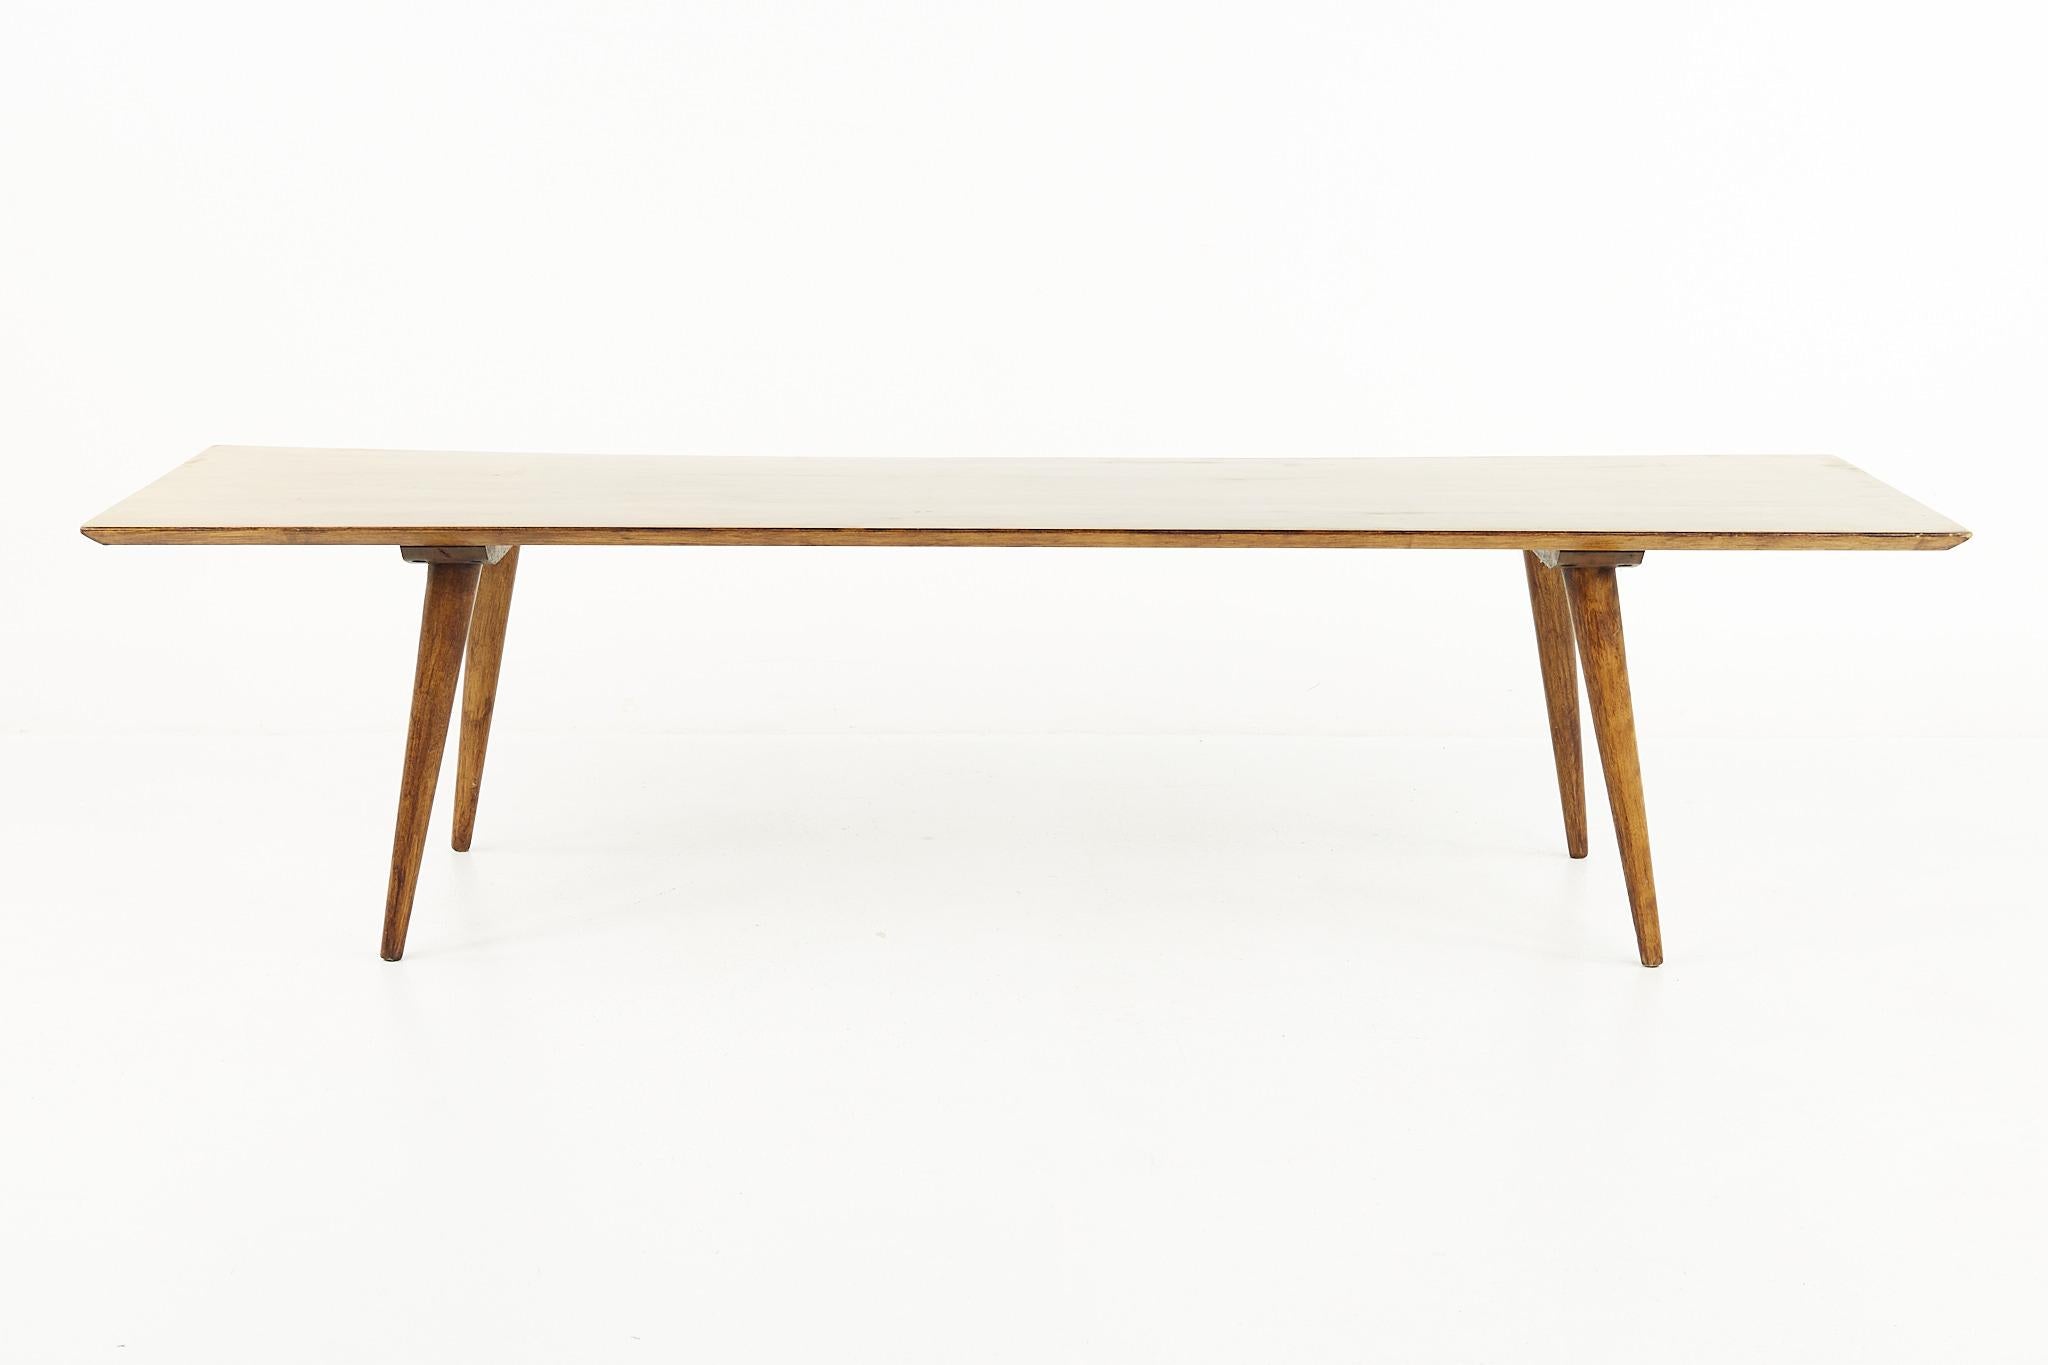 Paul McCobb for Planner Group mid century coffee table

The coffee table measures: 60 wide x 18.25 deep x 15 inches high

All pieces of furniture can be had in what we call restored vintage condition. That means the piece is restored upon